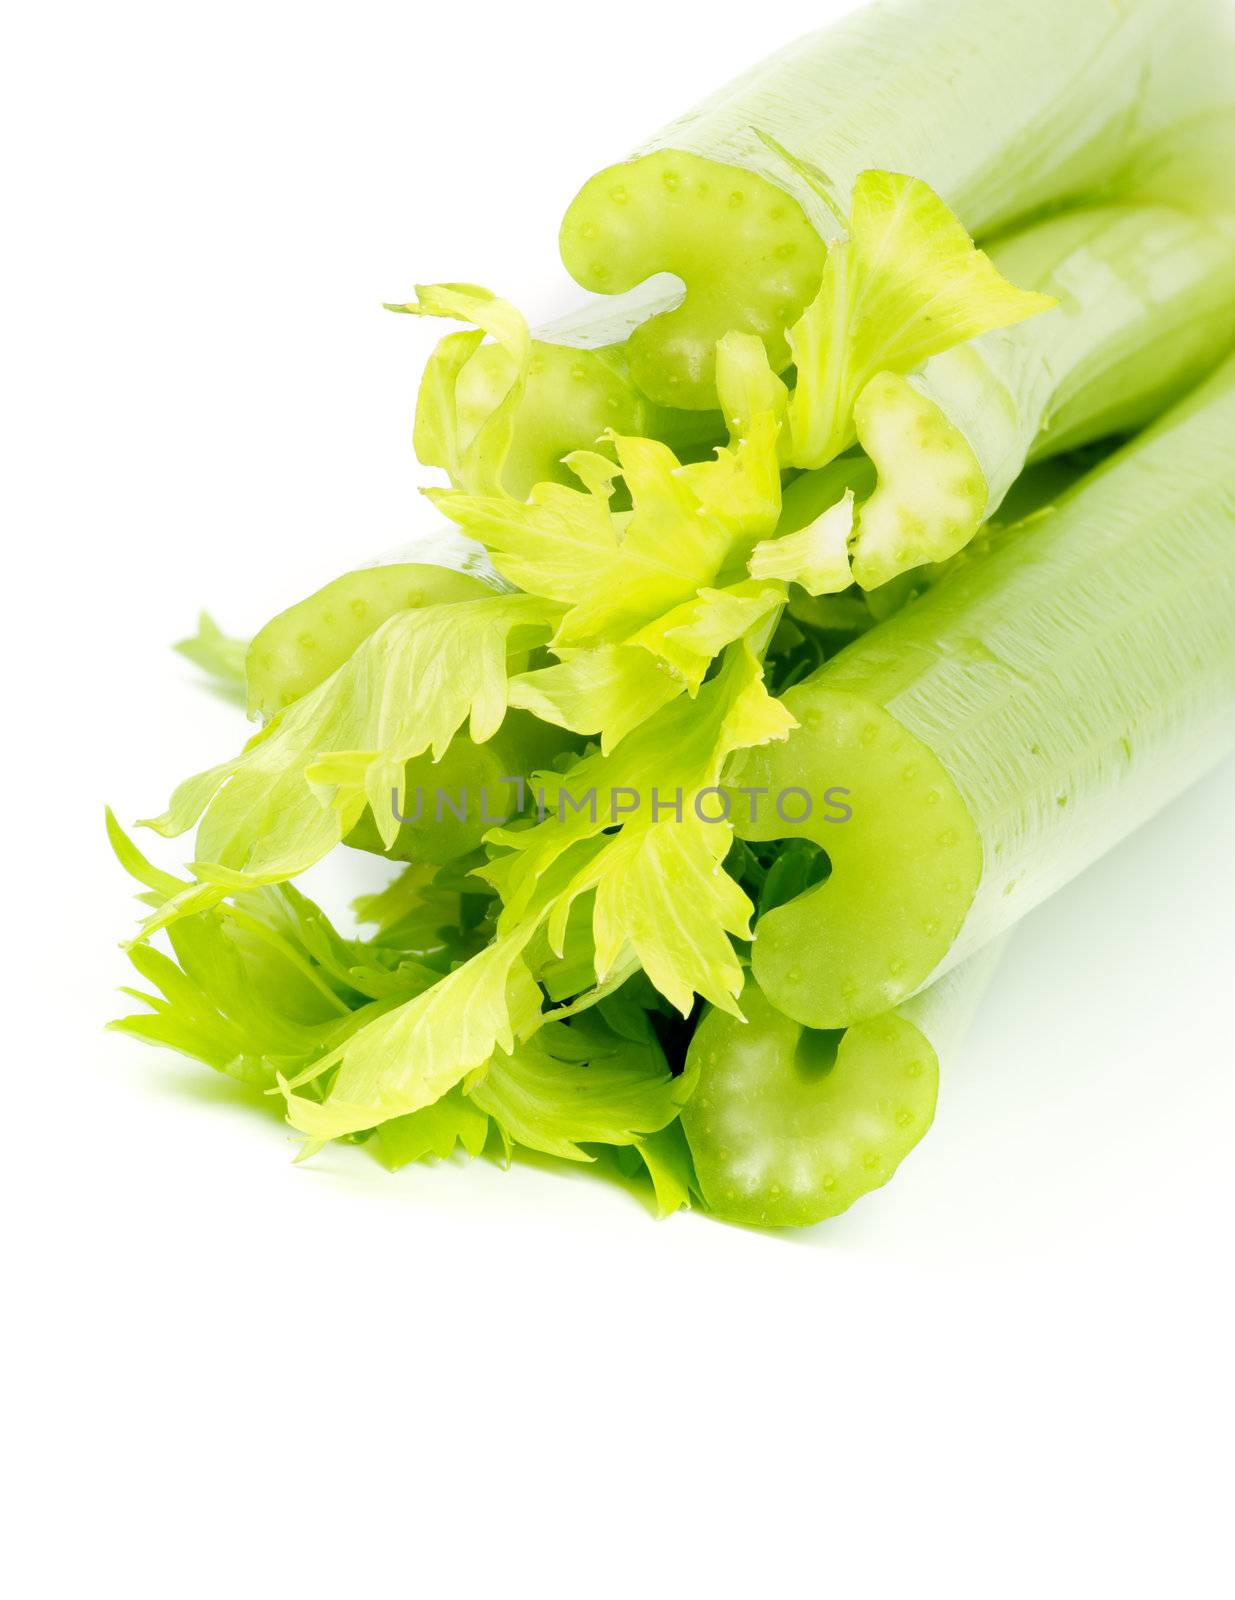 Stalks of Raw Celery with Leafs closeup on white background